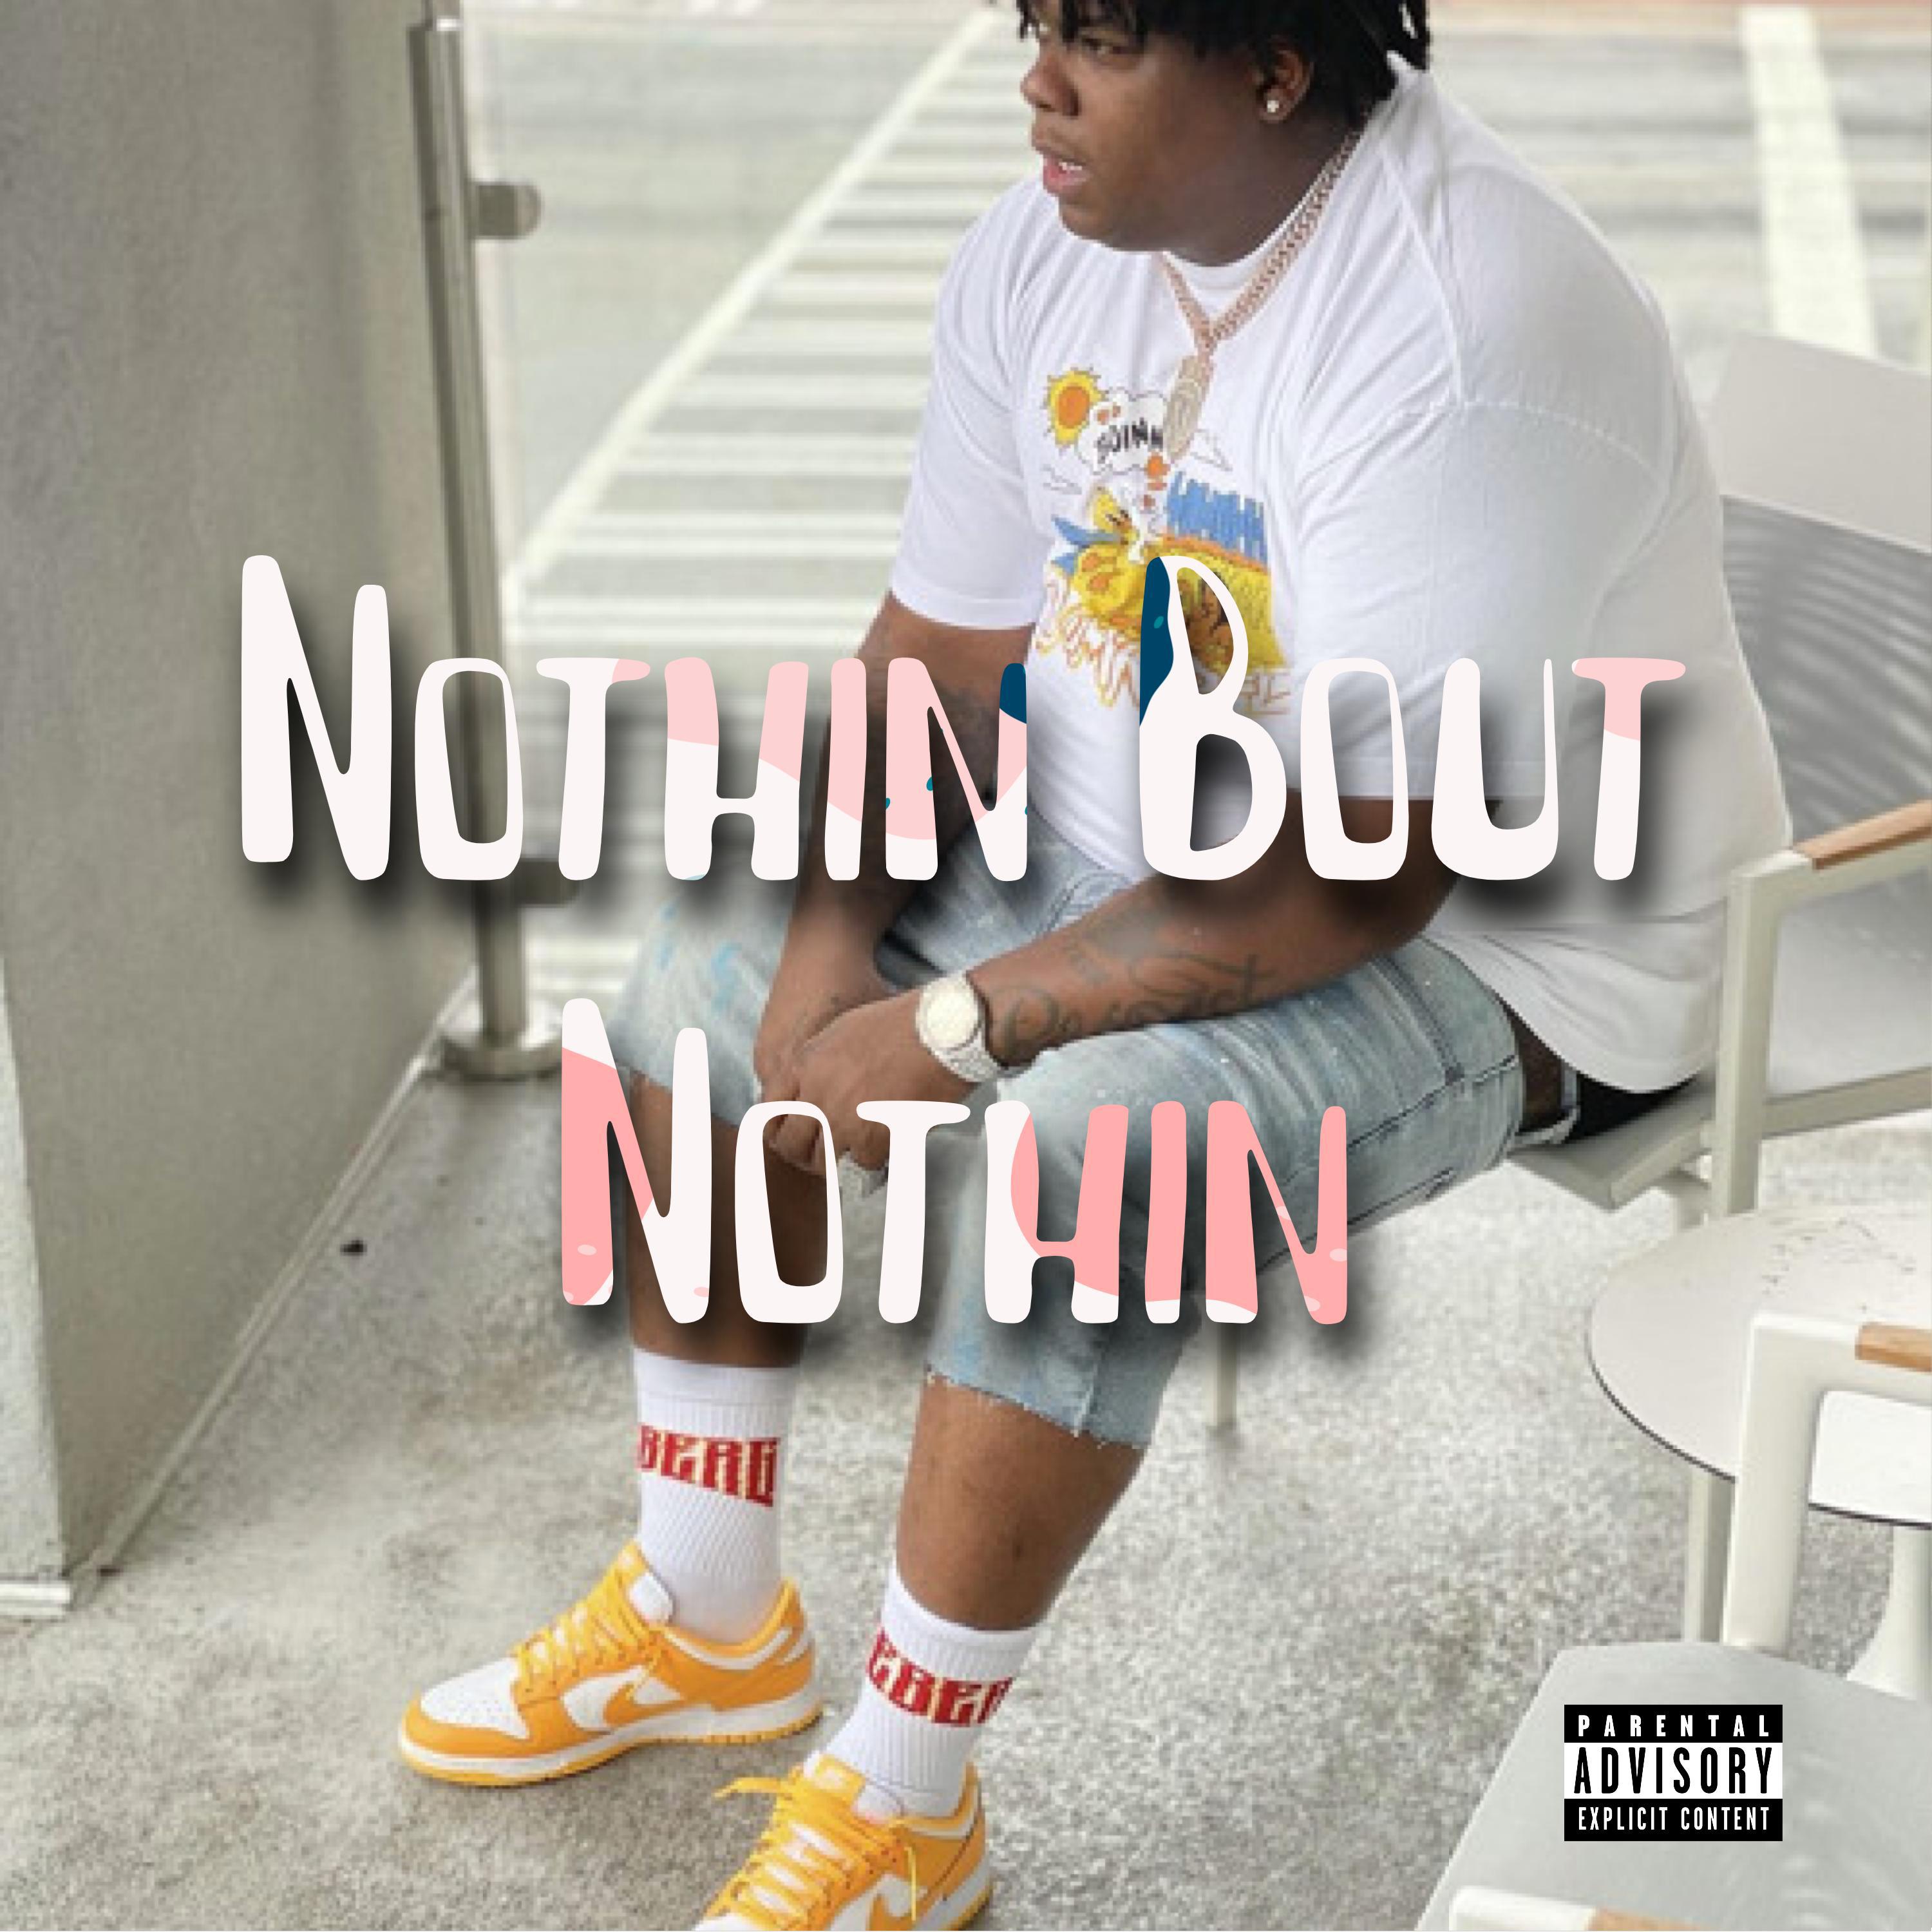 Big Homiie G - Nothin Bout Nothin